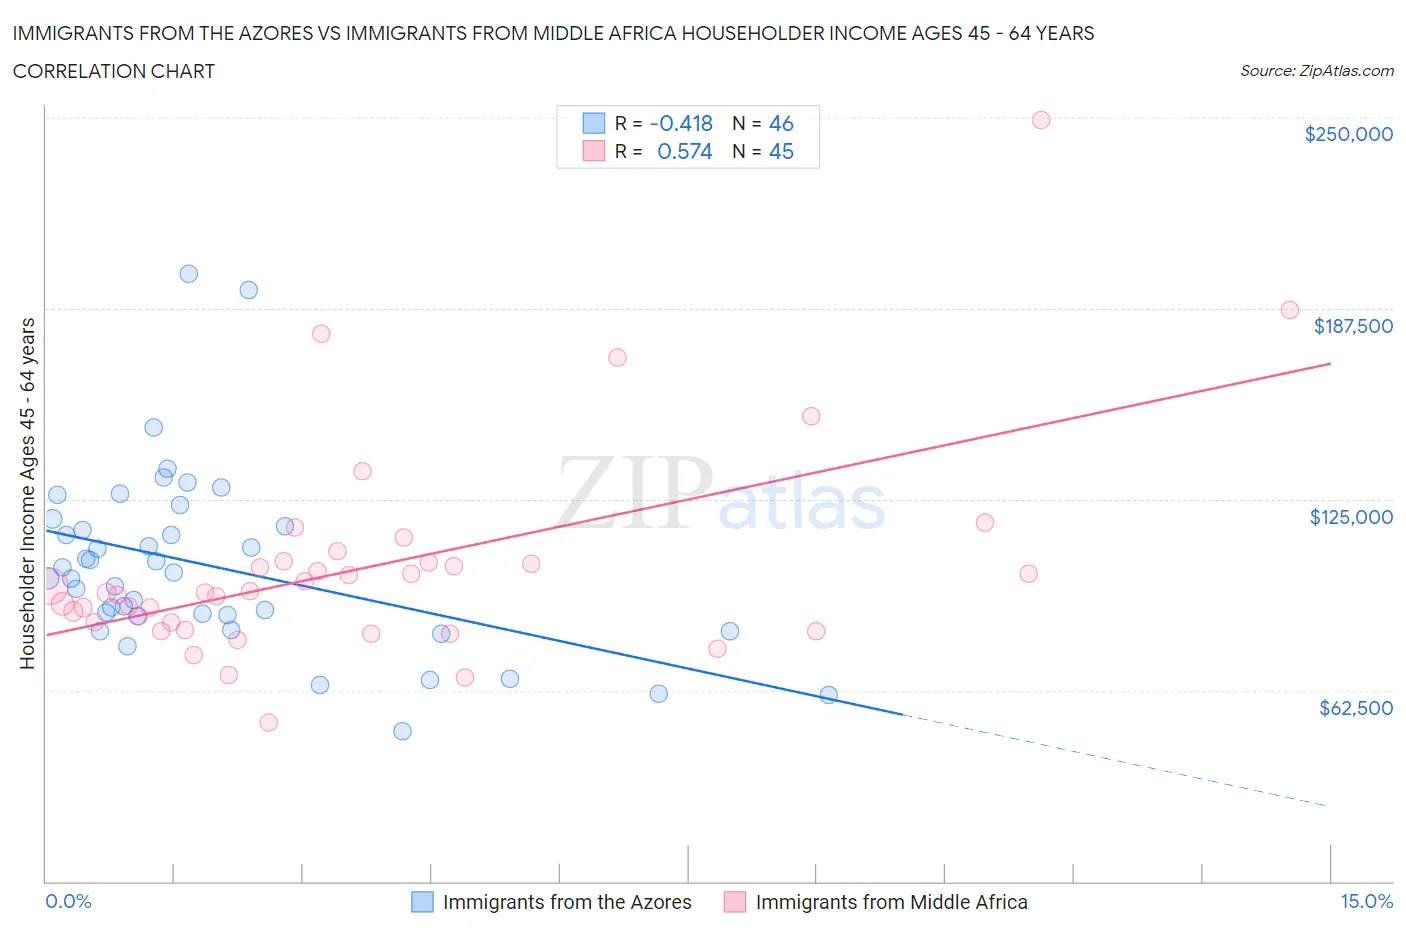 Immigrants from the Azores vs Immigrants from Middle Africa Householder Income Ages 45 - 64 years